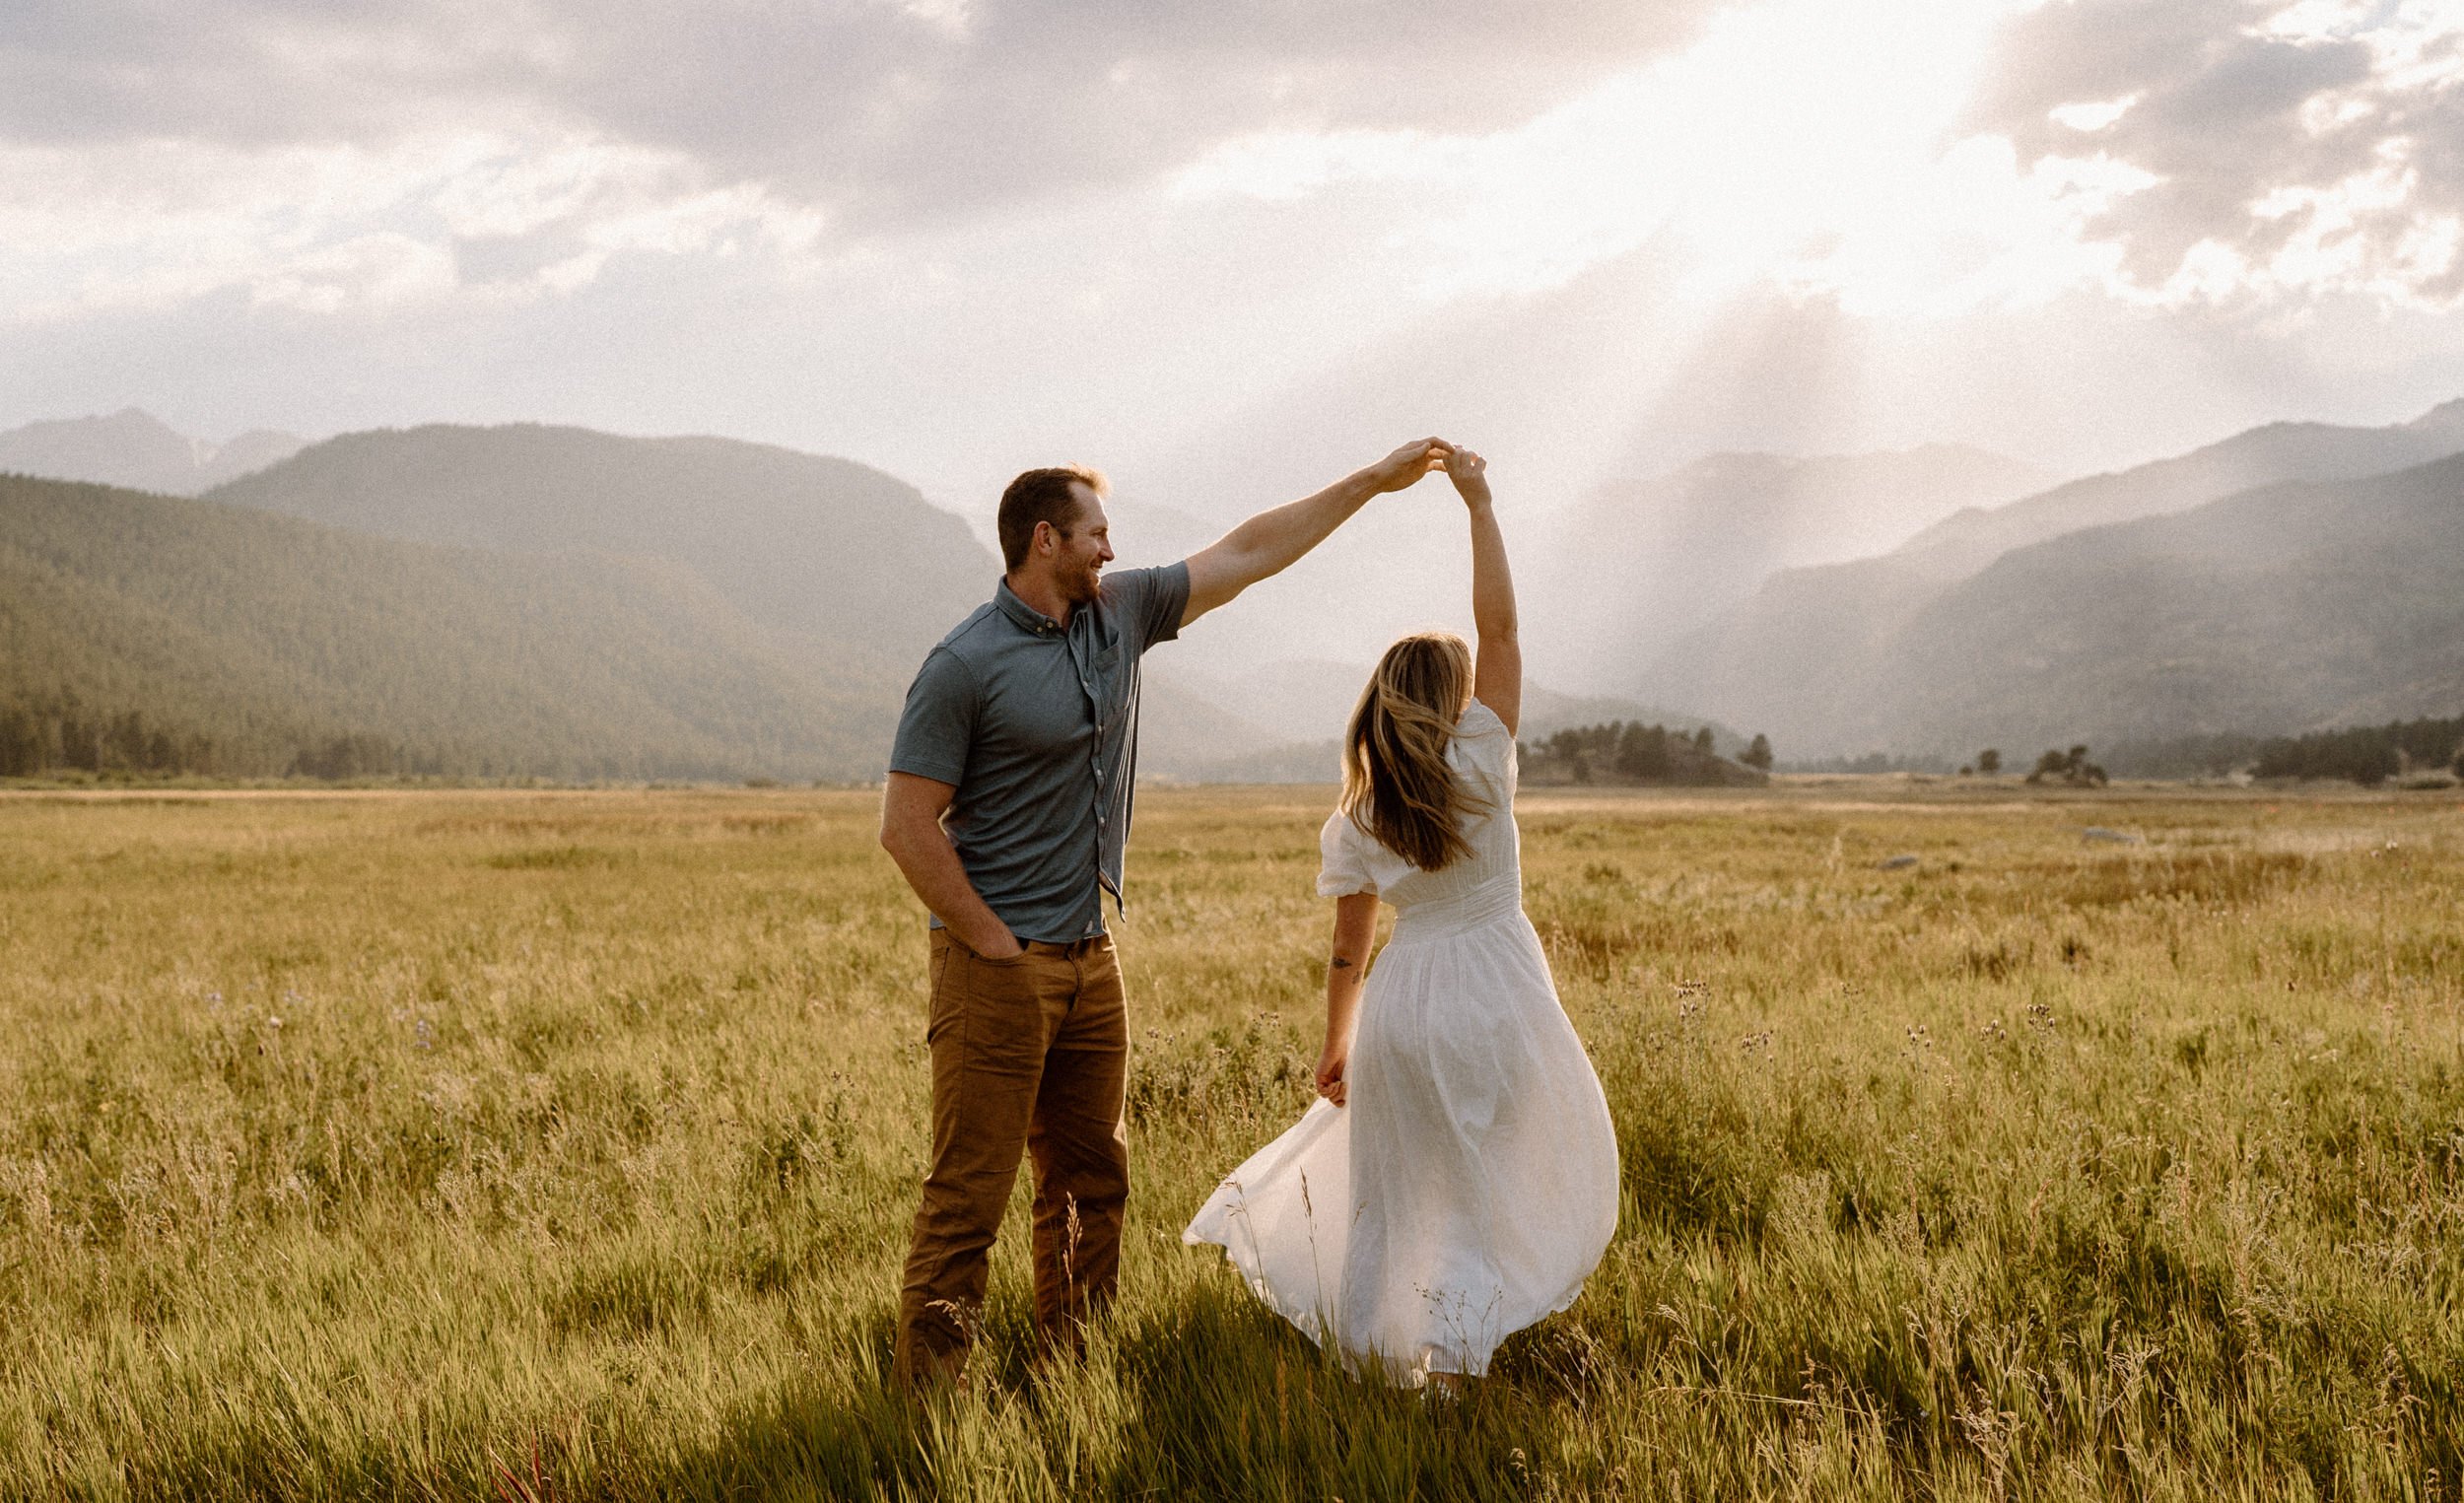 Man twirls woman in meadow during engagement session in Rocky Mountain National Park